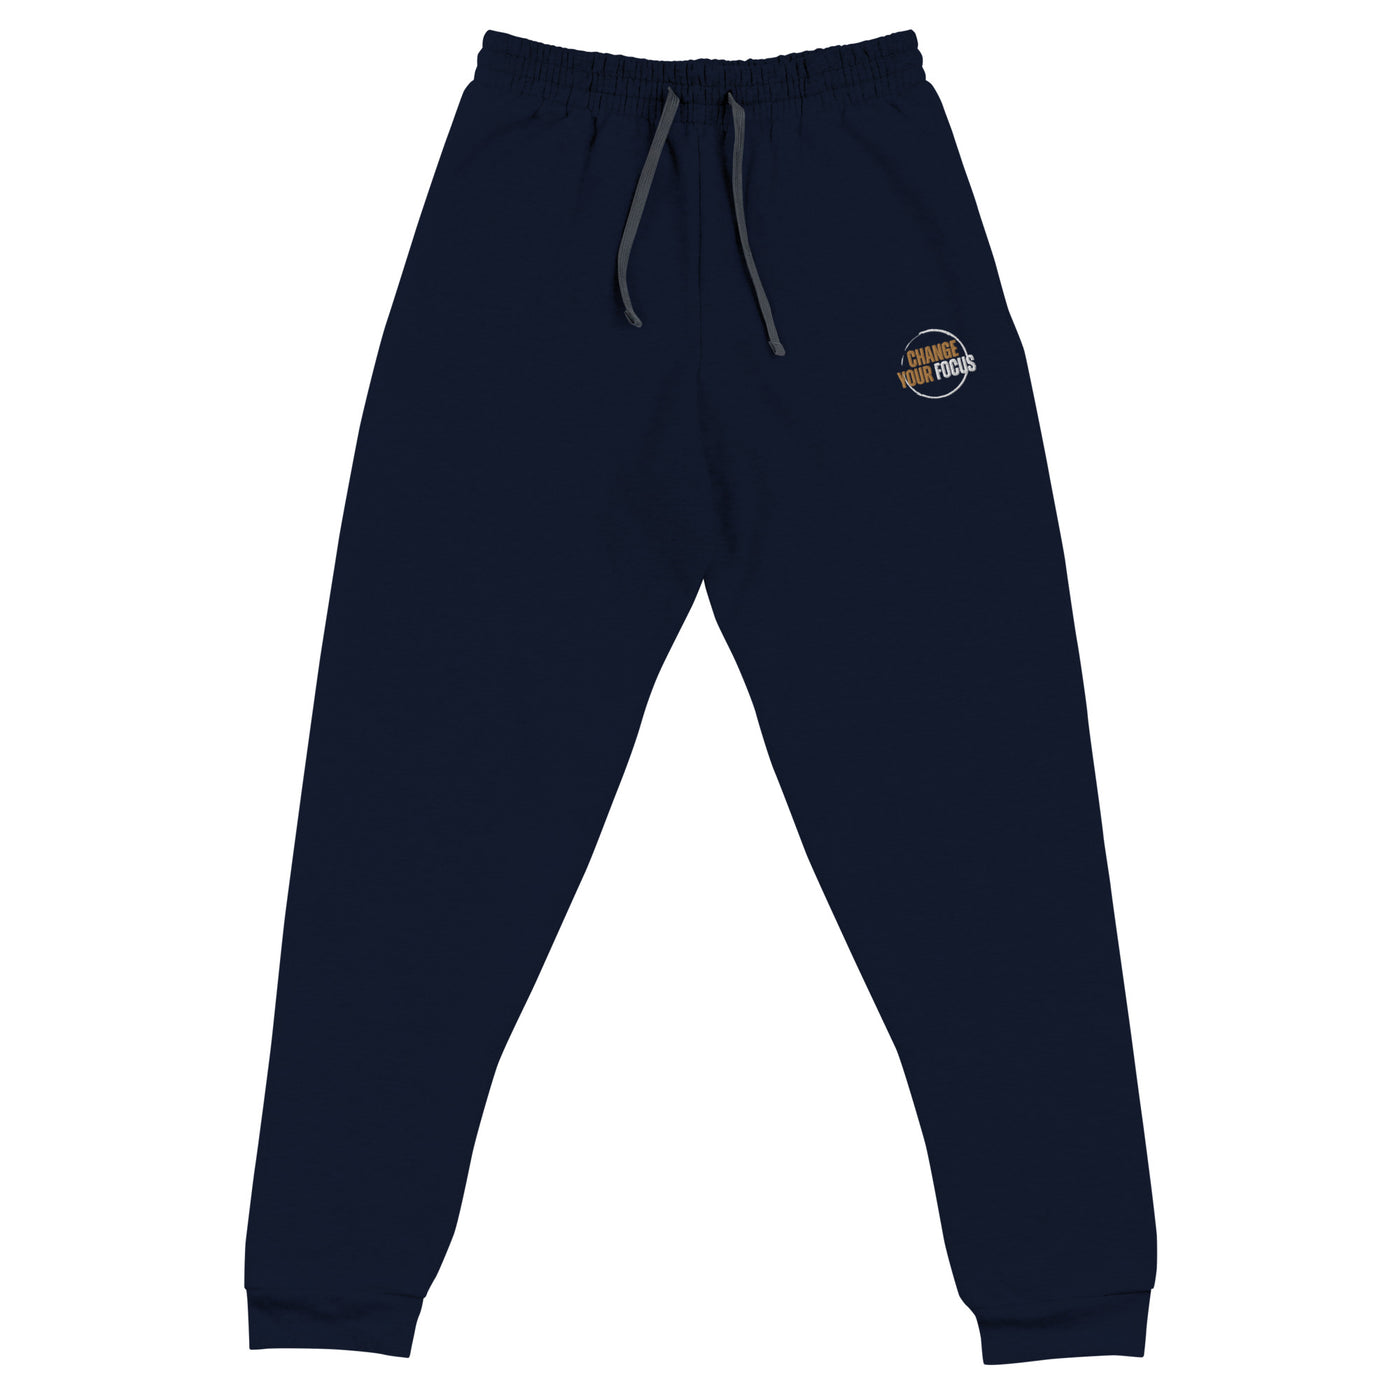 Men's Navy Embroidered Joggers - Change Your Focus